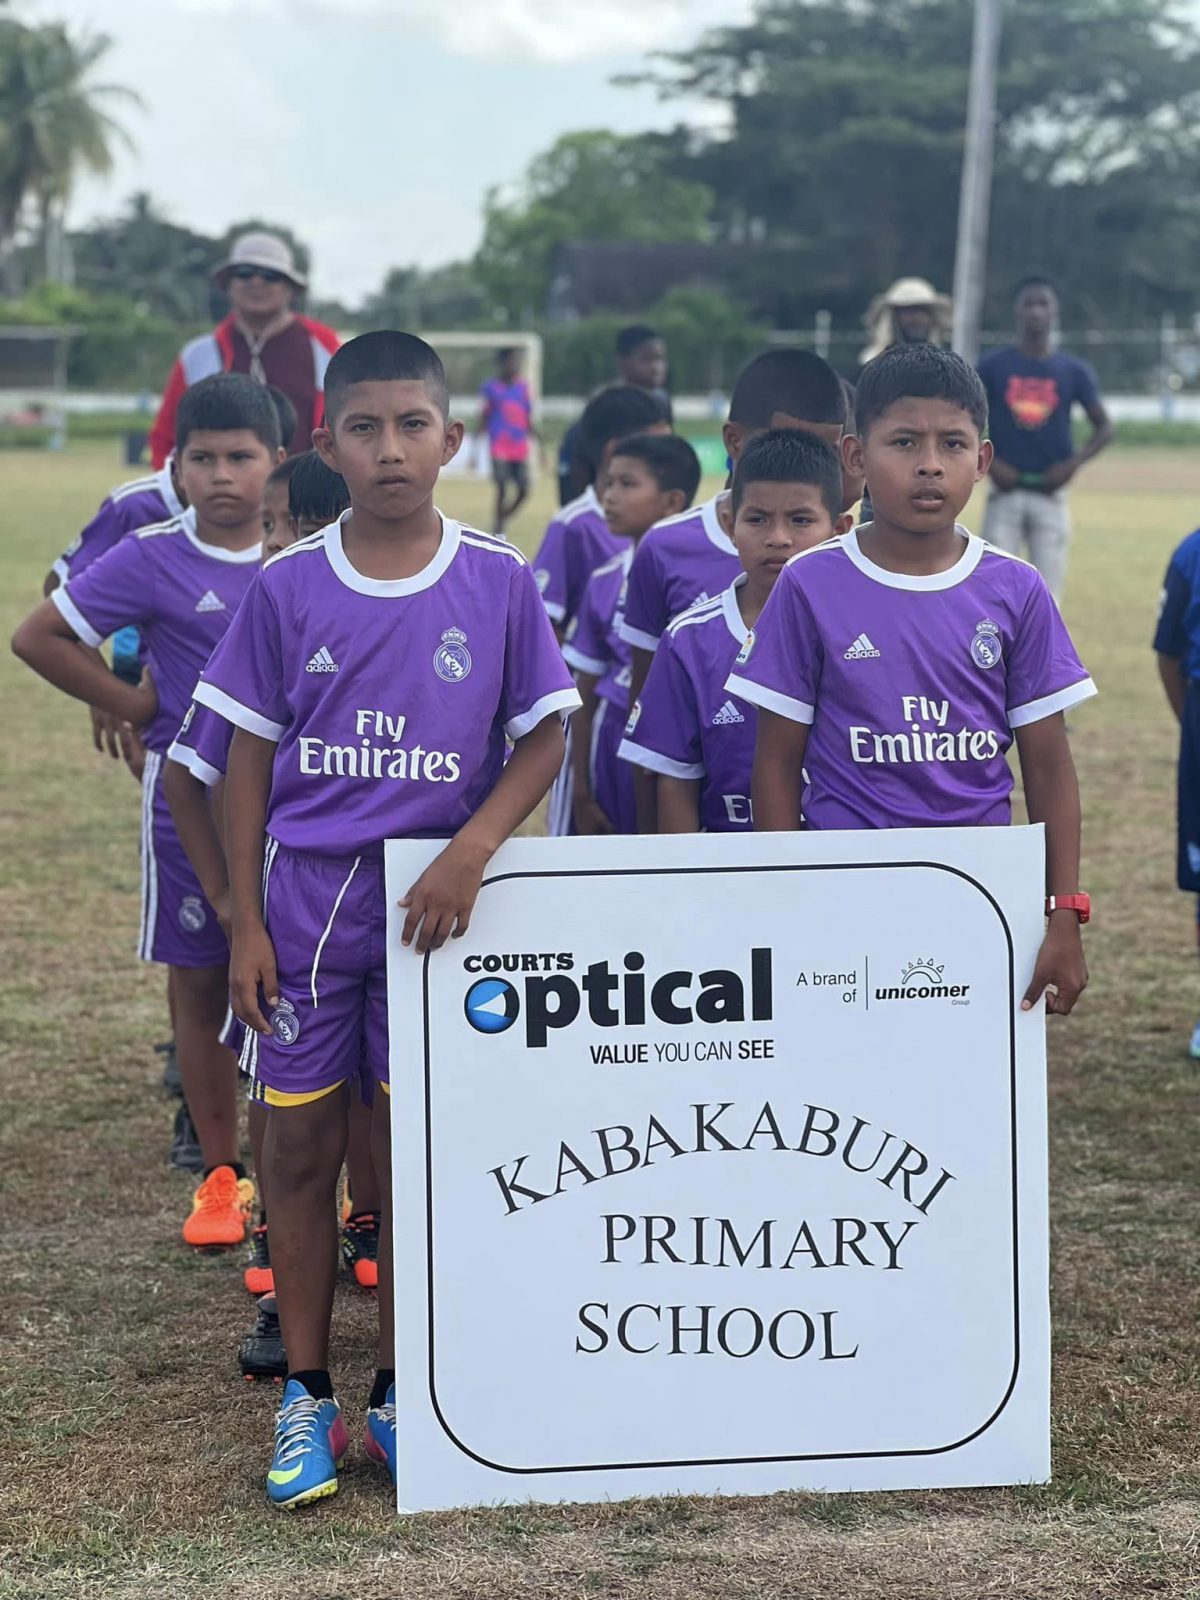 The Kabakaburi Primary School team at the March Past of the Courts Optical Pee Wee Schools U-11 tournament